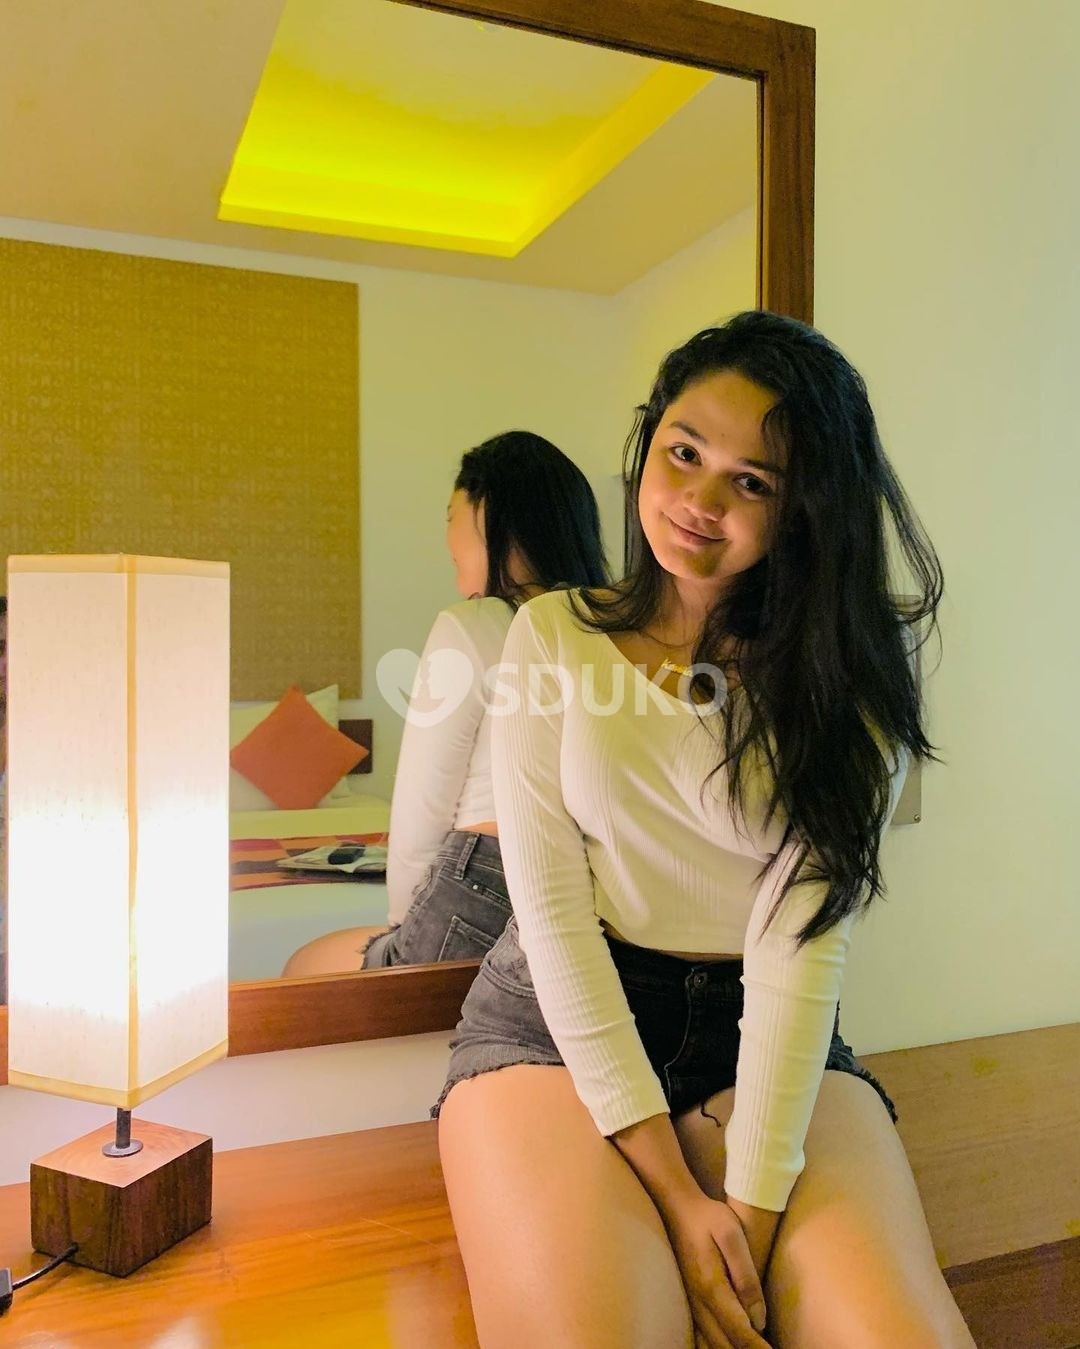 Lajpath nagar 🔝💯 GOOD ALL' TYPE GIRL FULLY SATISFIED AND SECURE